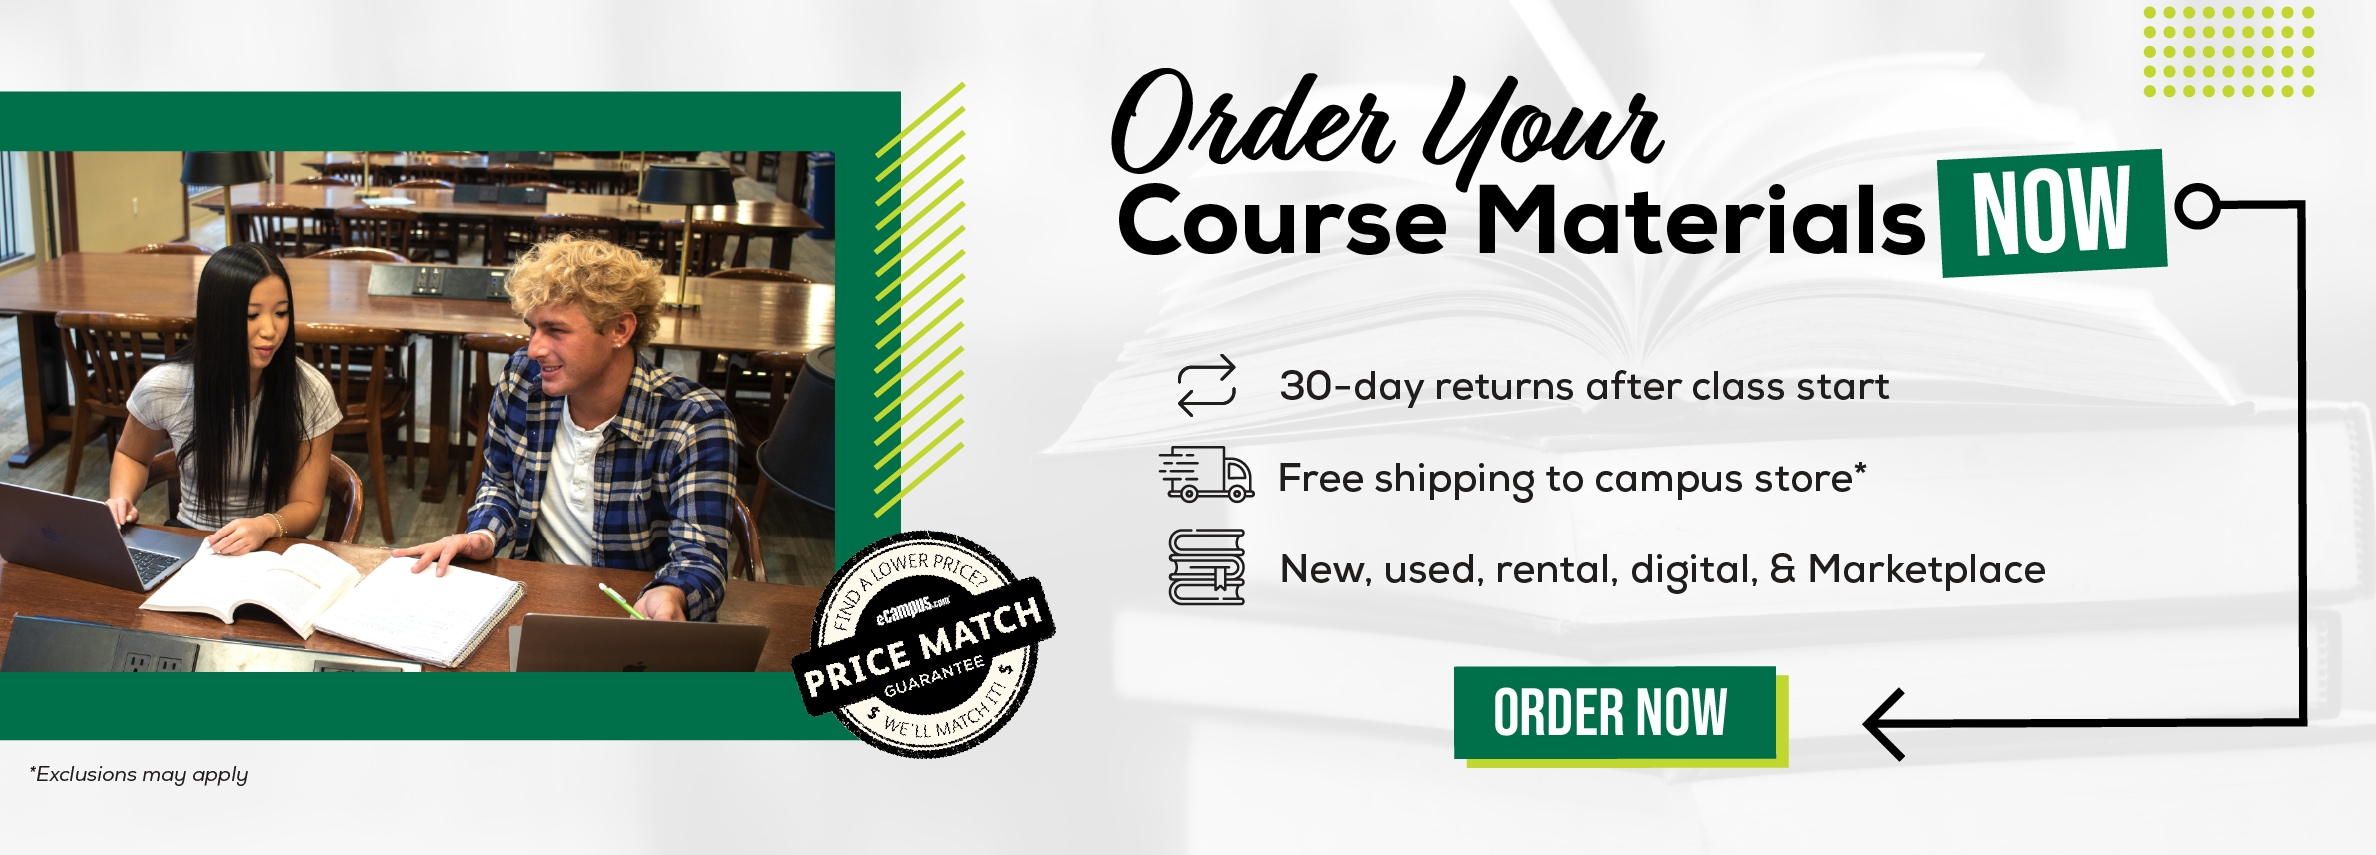 Order Your Course Materials Now. 30-day returns after class start. Free shipping to campus store* New, used, rental, digital, & Marketplace. Order now. *Exclusions may apply.